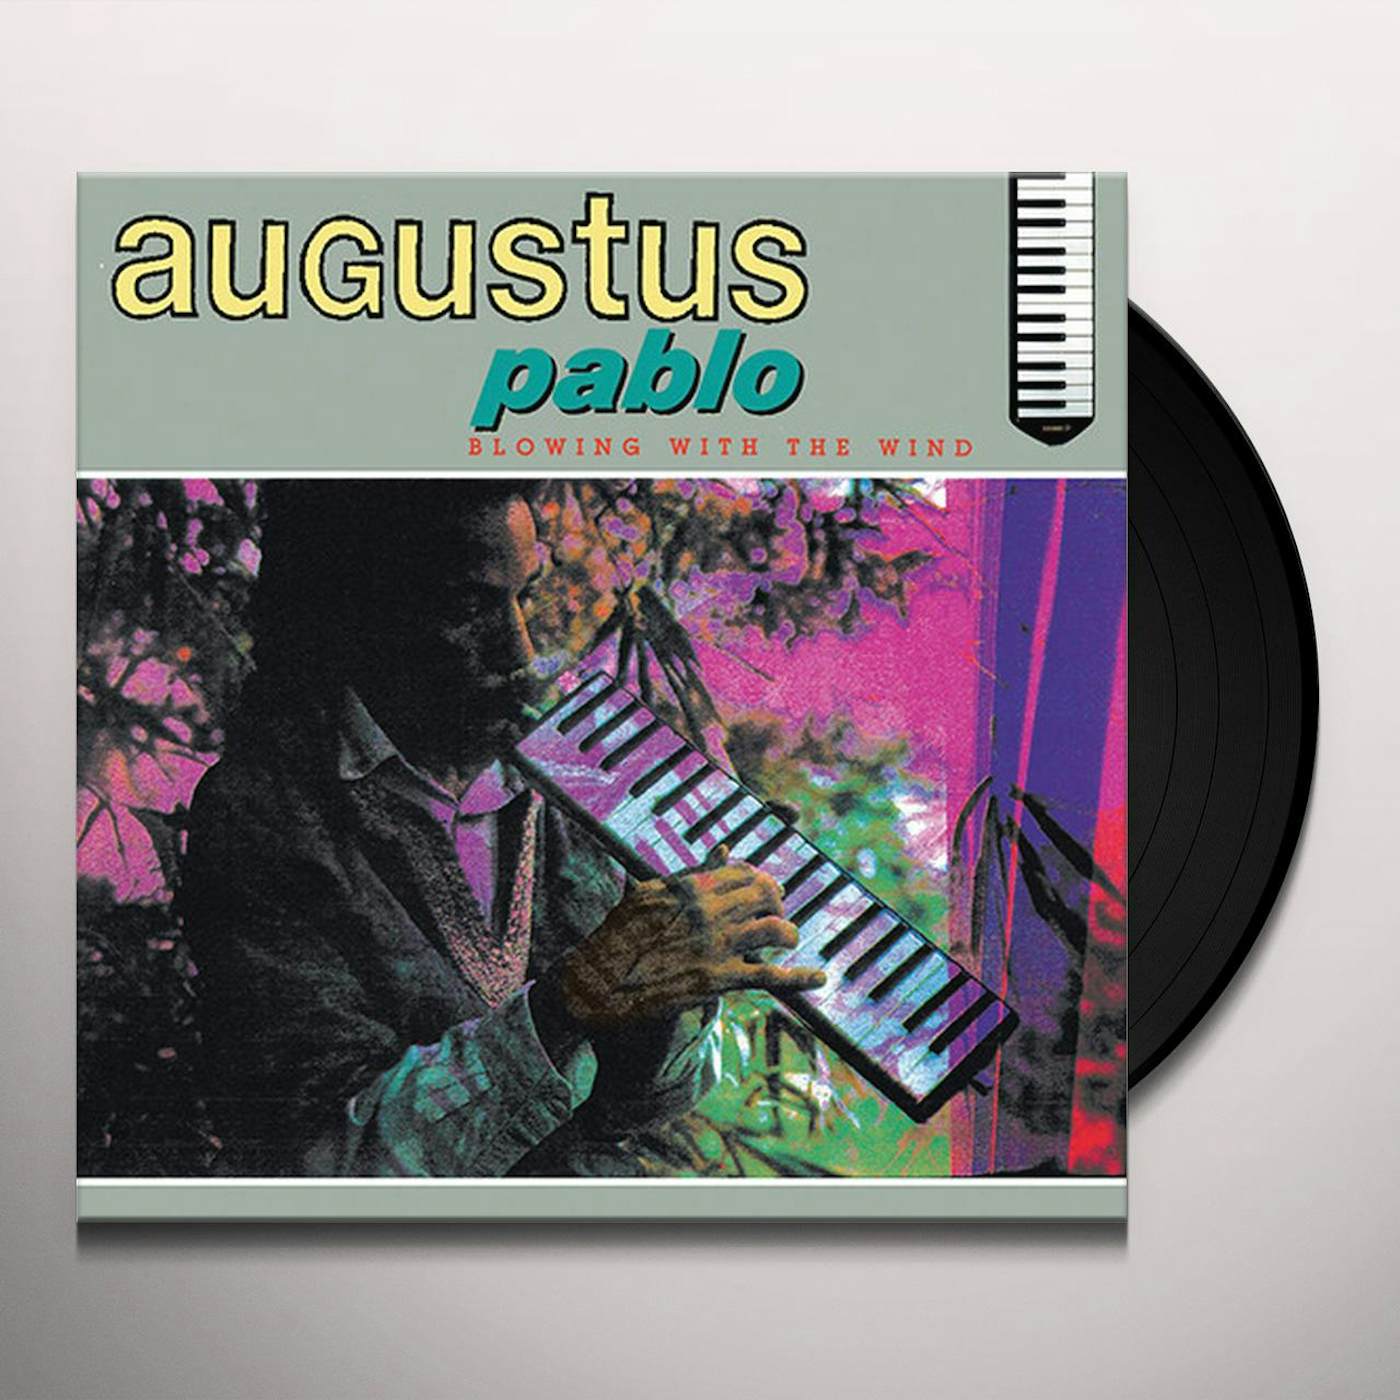 Augustus Pablo Blowing With The Wind Vinyl Record